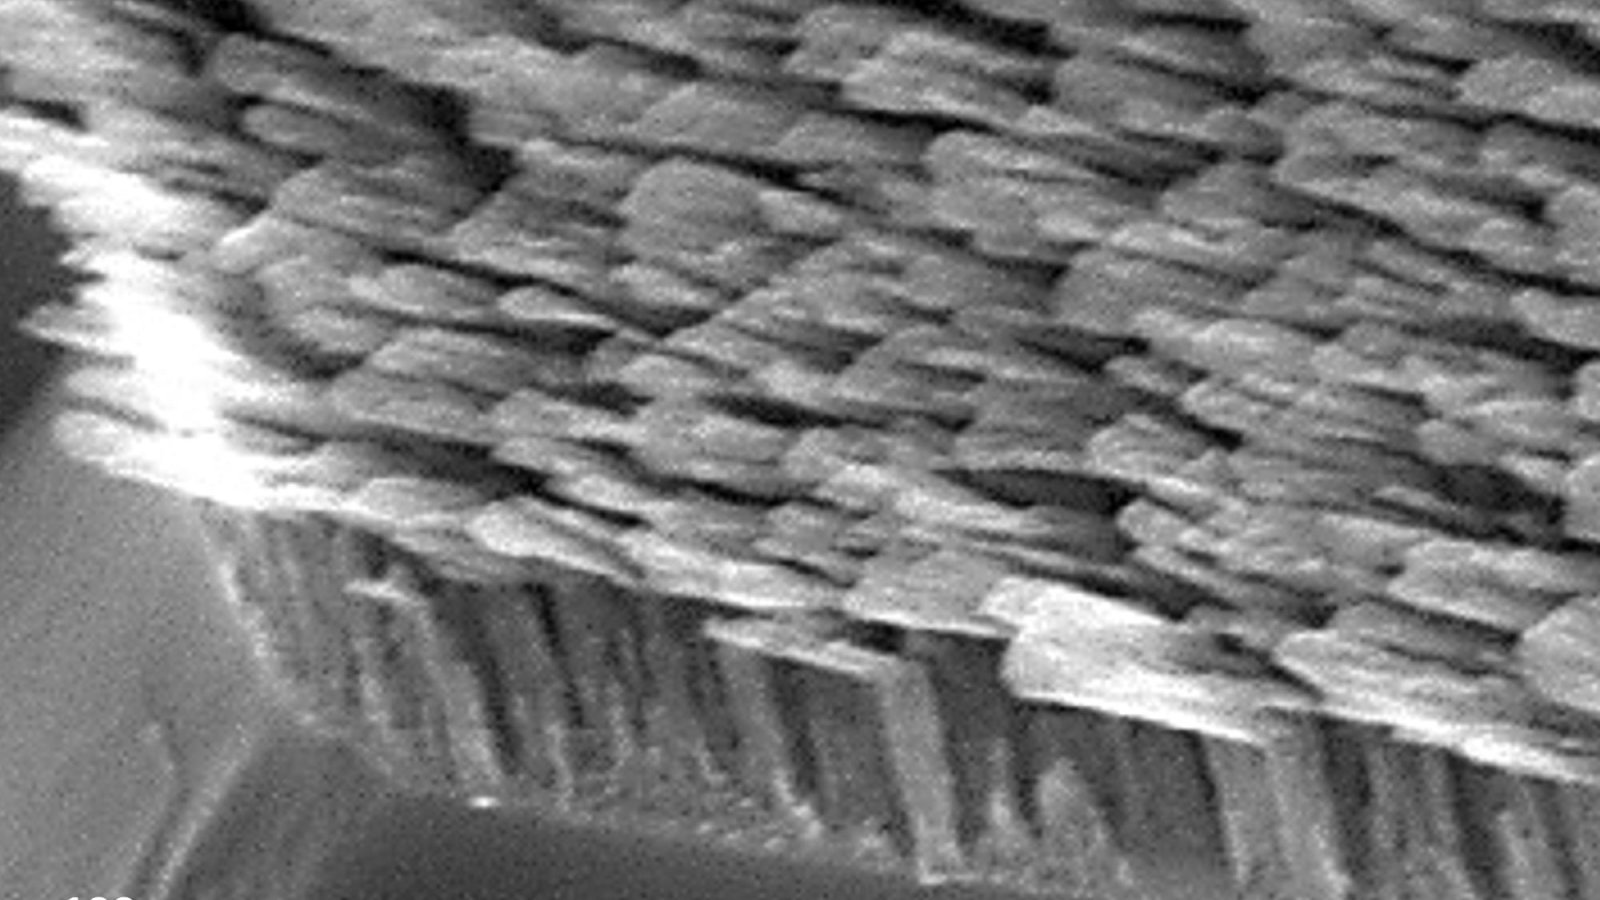 Researchers fabricated an optical element that uses a forest of tiny, antenna-like nanorods, seen here, that together create a metamaterial able to control the spin of light. The metamaterial nanorods appear to be shaped like the letter “L” when seen at the nanoscale. 